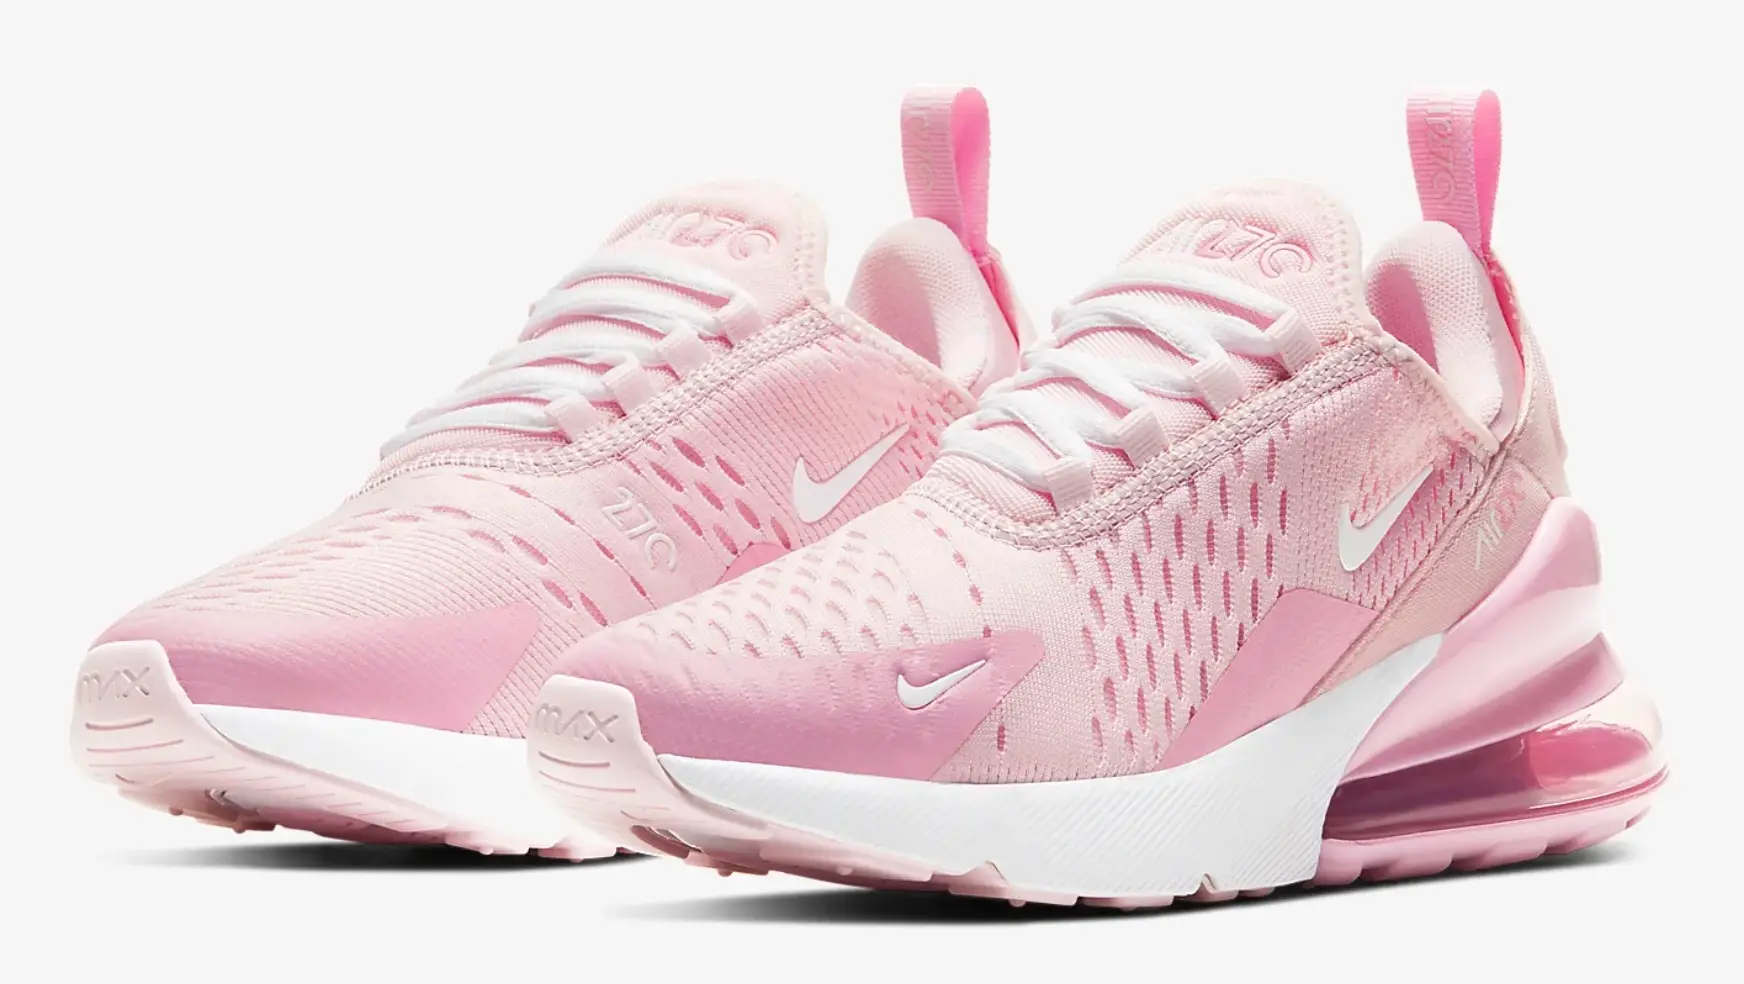 The Latest Nike Air Max 270 'Pink Foam' Is As Pretty As It Gets | The ...